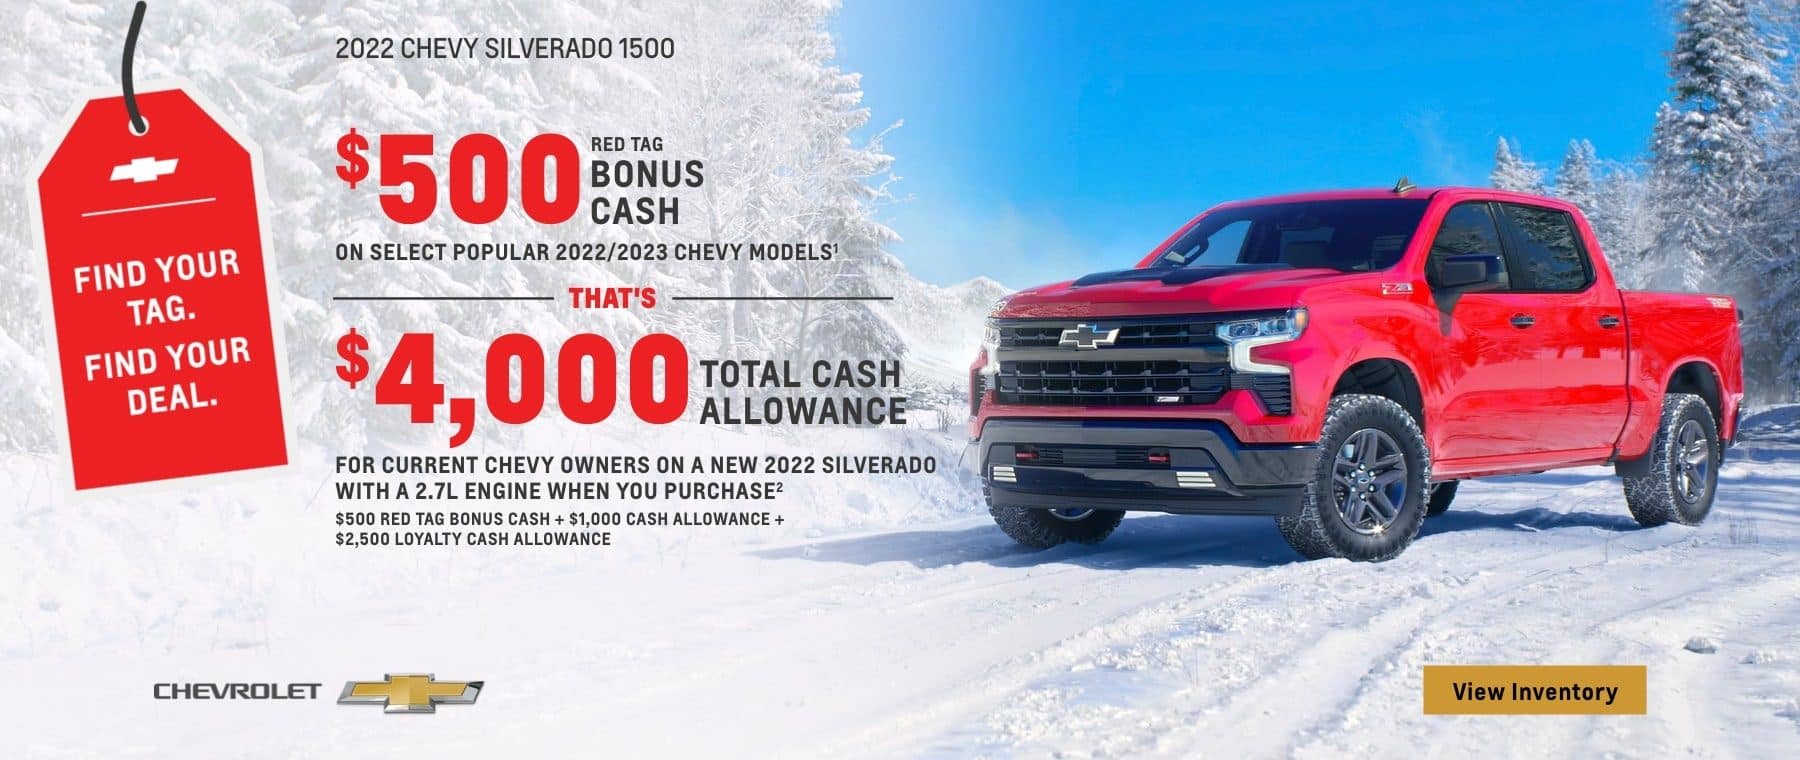 2022 Chevy Silverado 1500. $500 Red Tag Bonus Cash on select popular 2022/2023 Chevy models. That's $4,000 total cash allowance for current Chevy owners on a new 2022 Silverado with a 2.7L engine when you purchase. $500 Red Tag Bonus Cash + $1,000 Cash Allowance + $2,500 Loyalty Cash Allowance